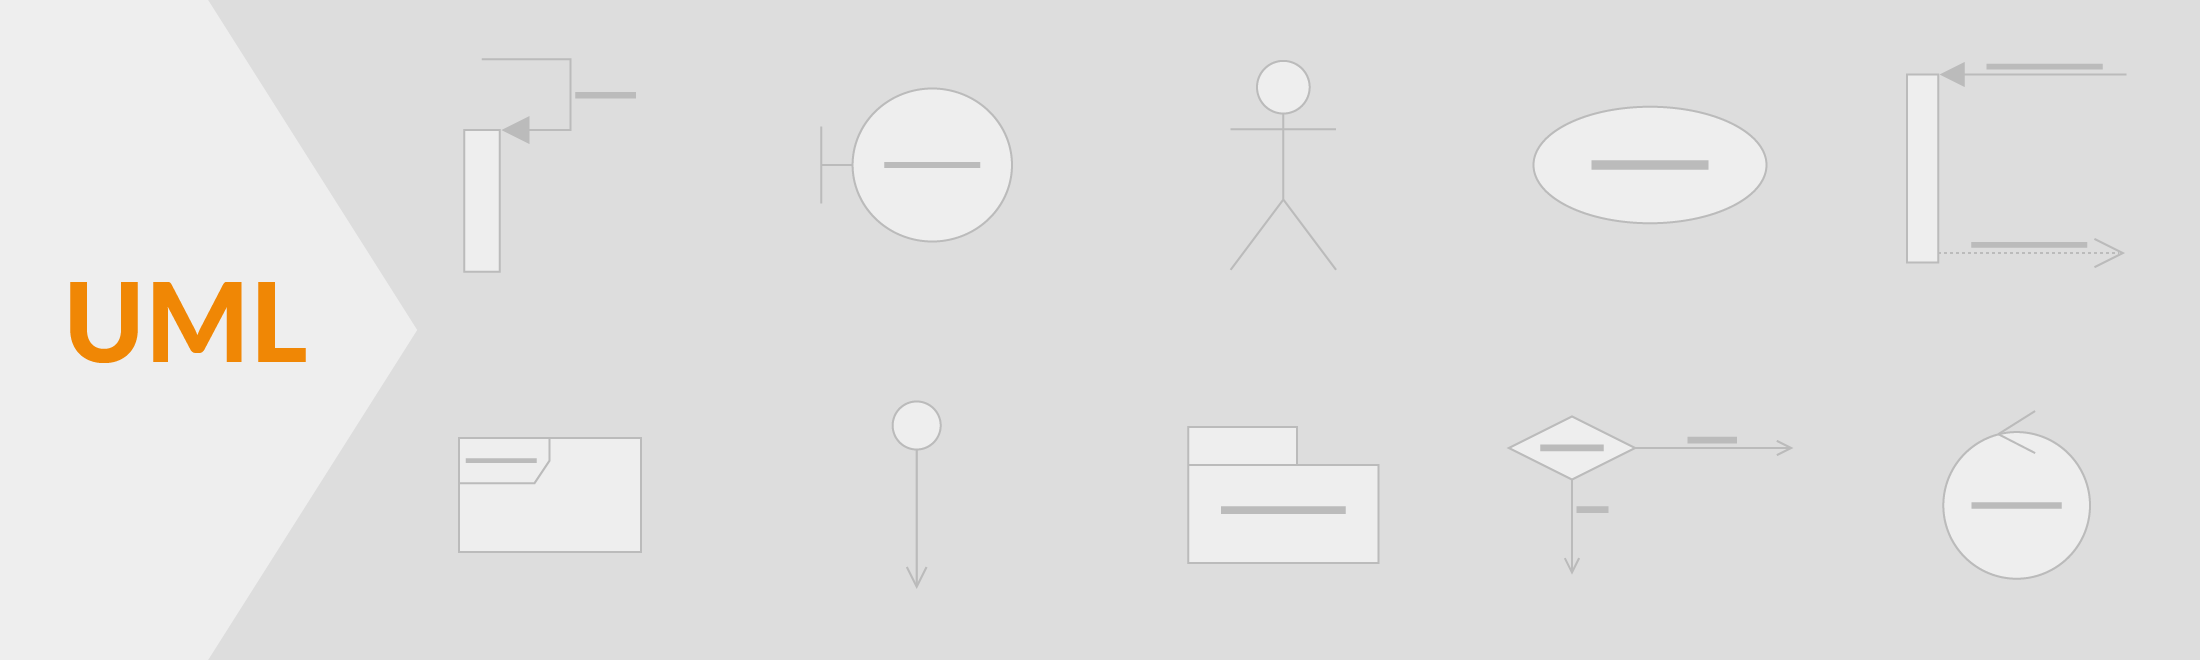 create a variety of different uml diagrams with draw.io